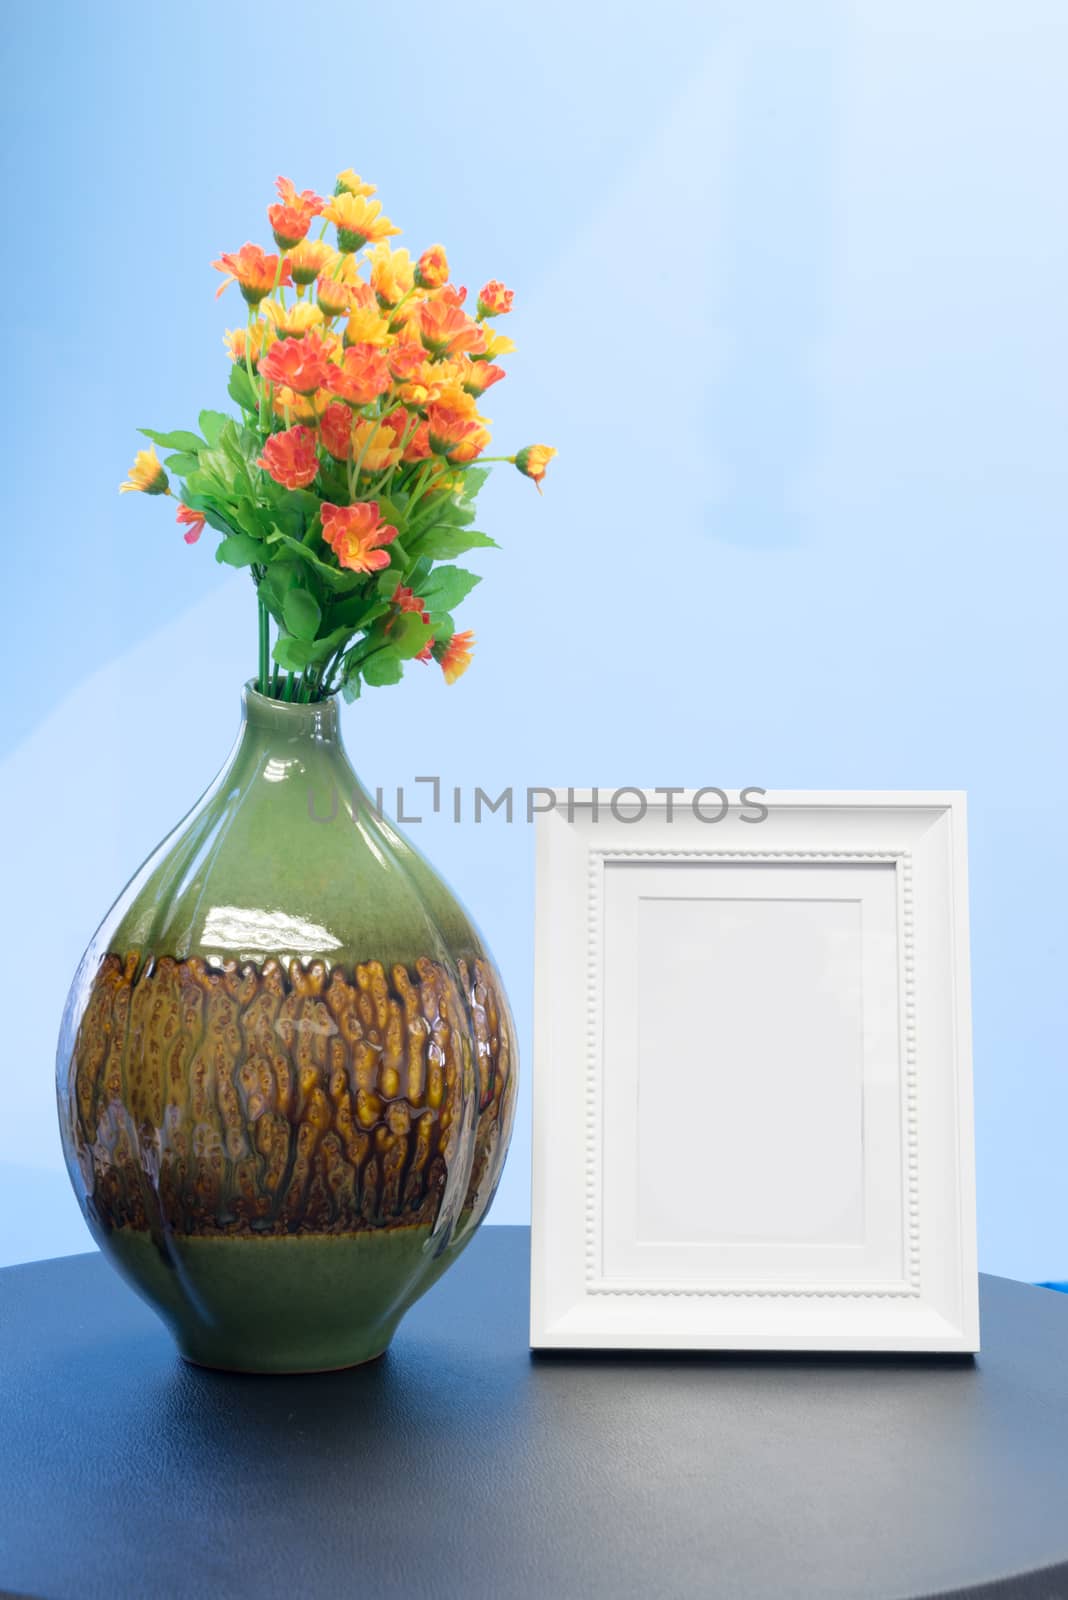 Bouquet of plastic flowers Placed on the desk in the office beside blank photo frame